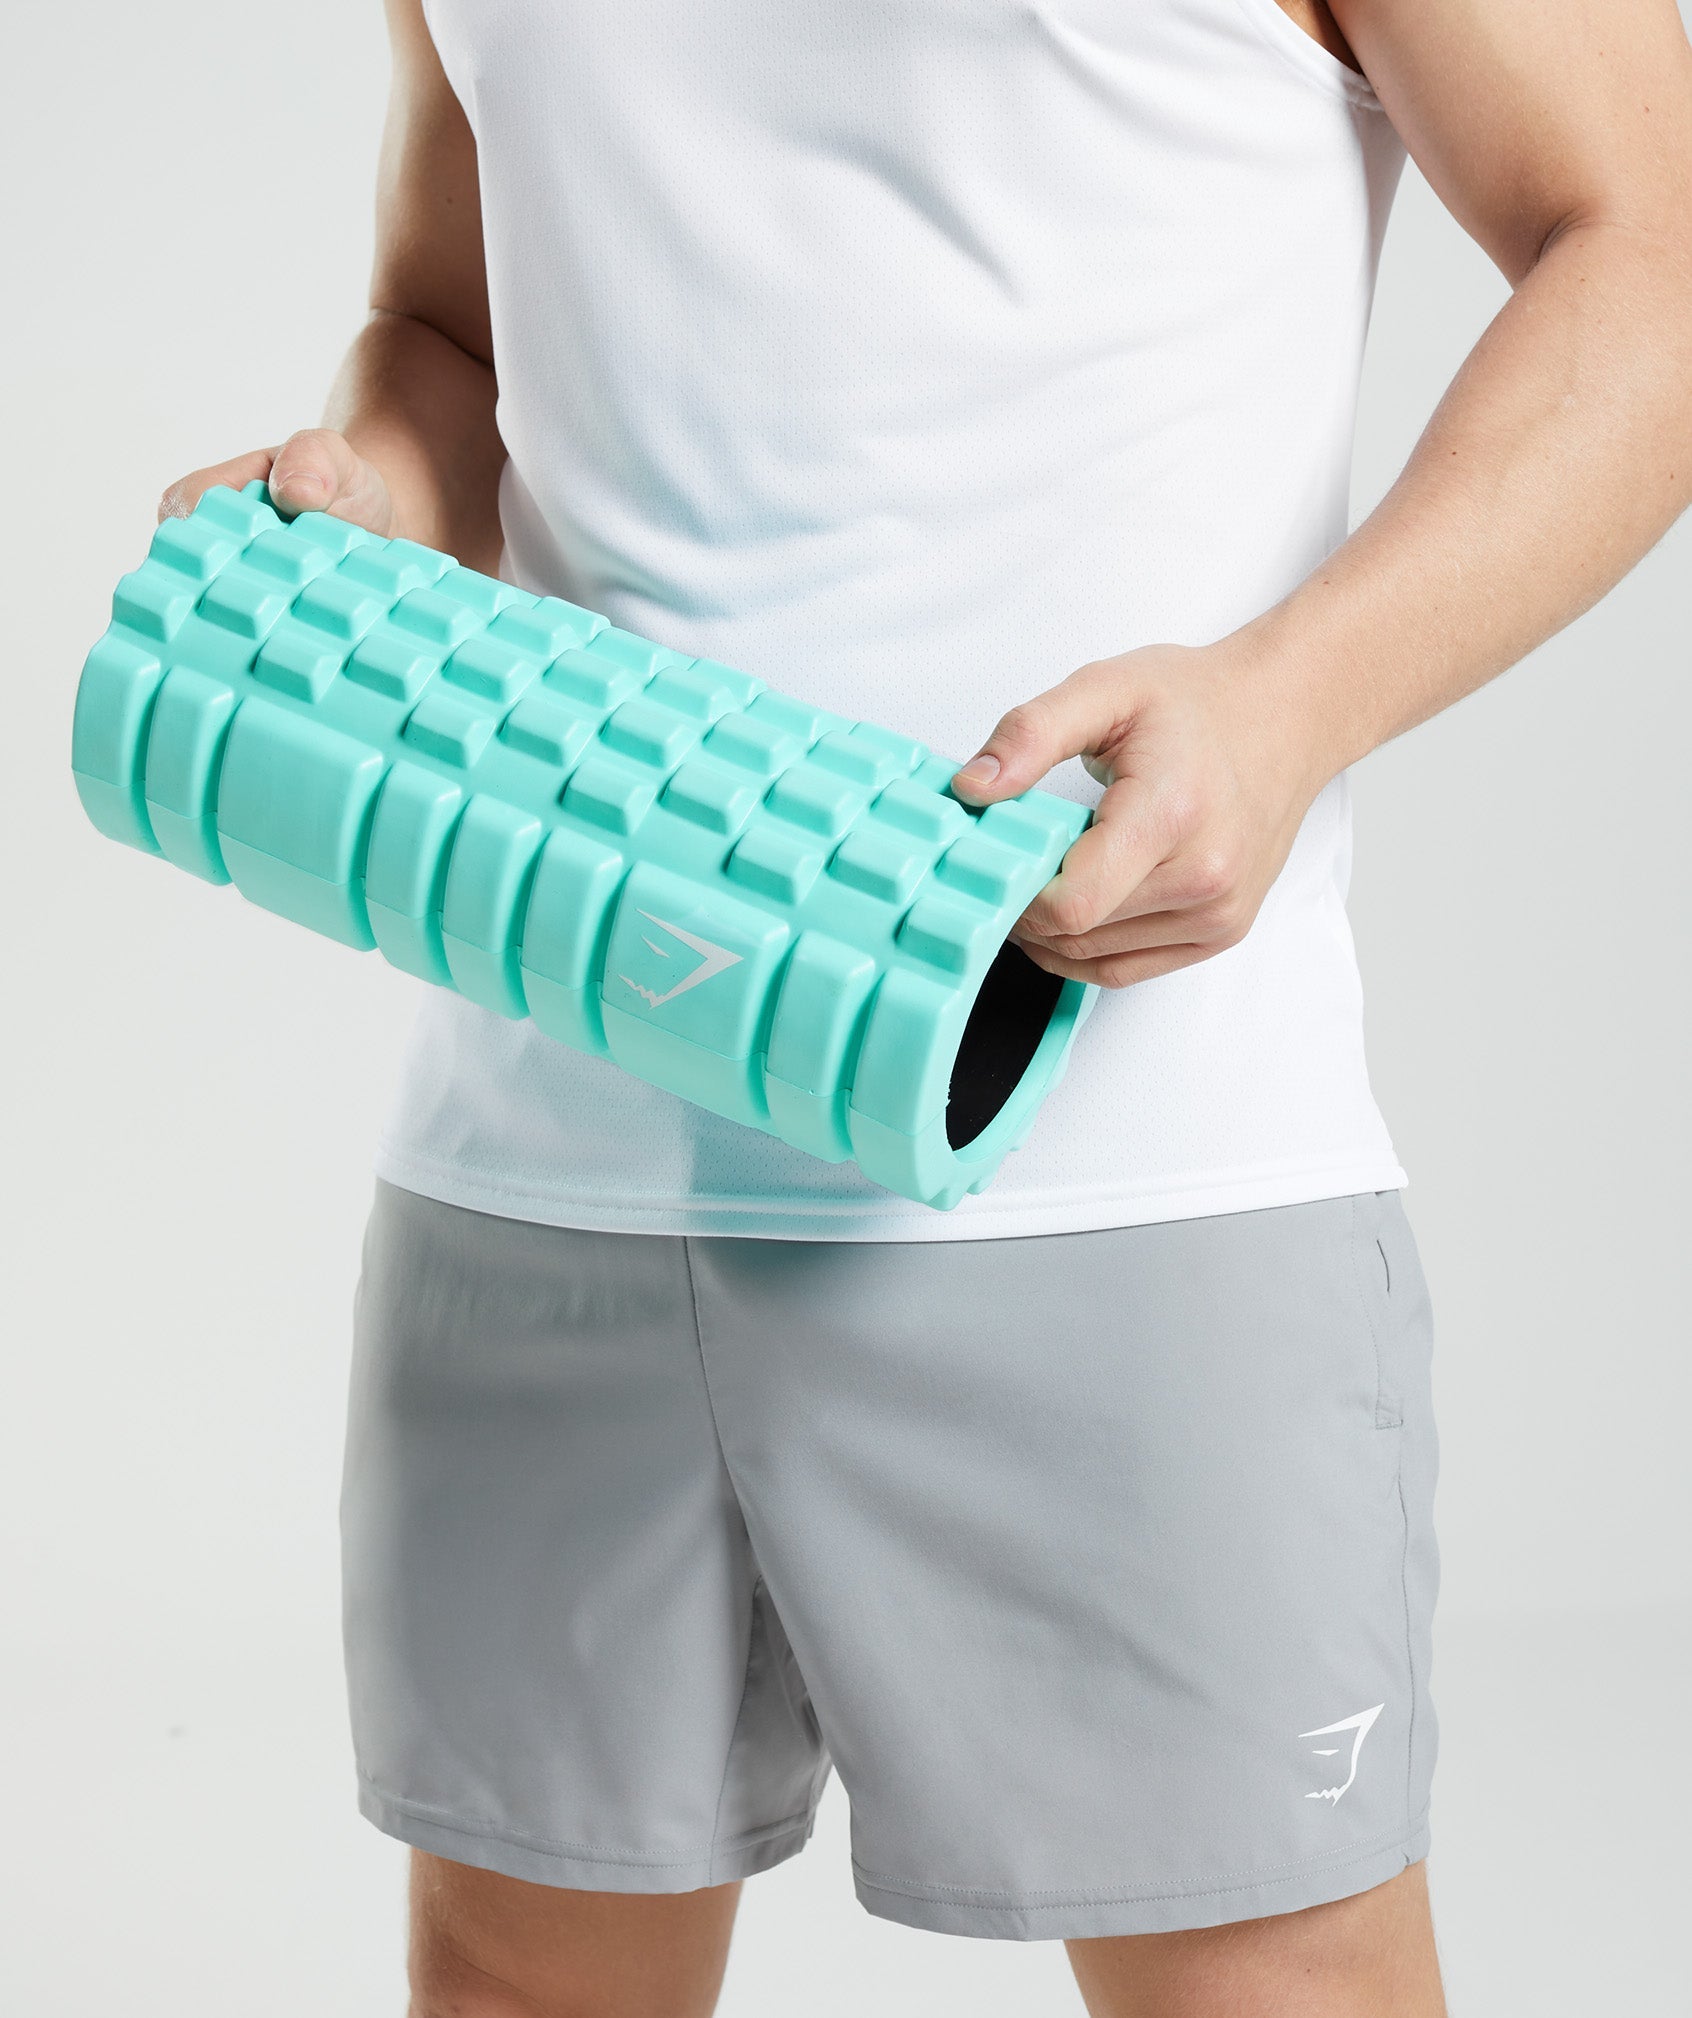 Recovery Roller in Bright Turquoise - view 3